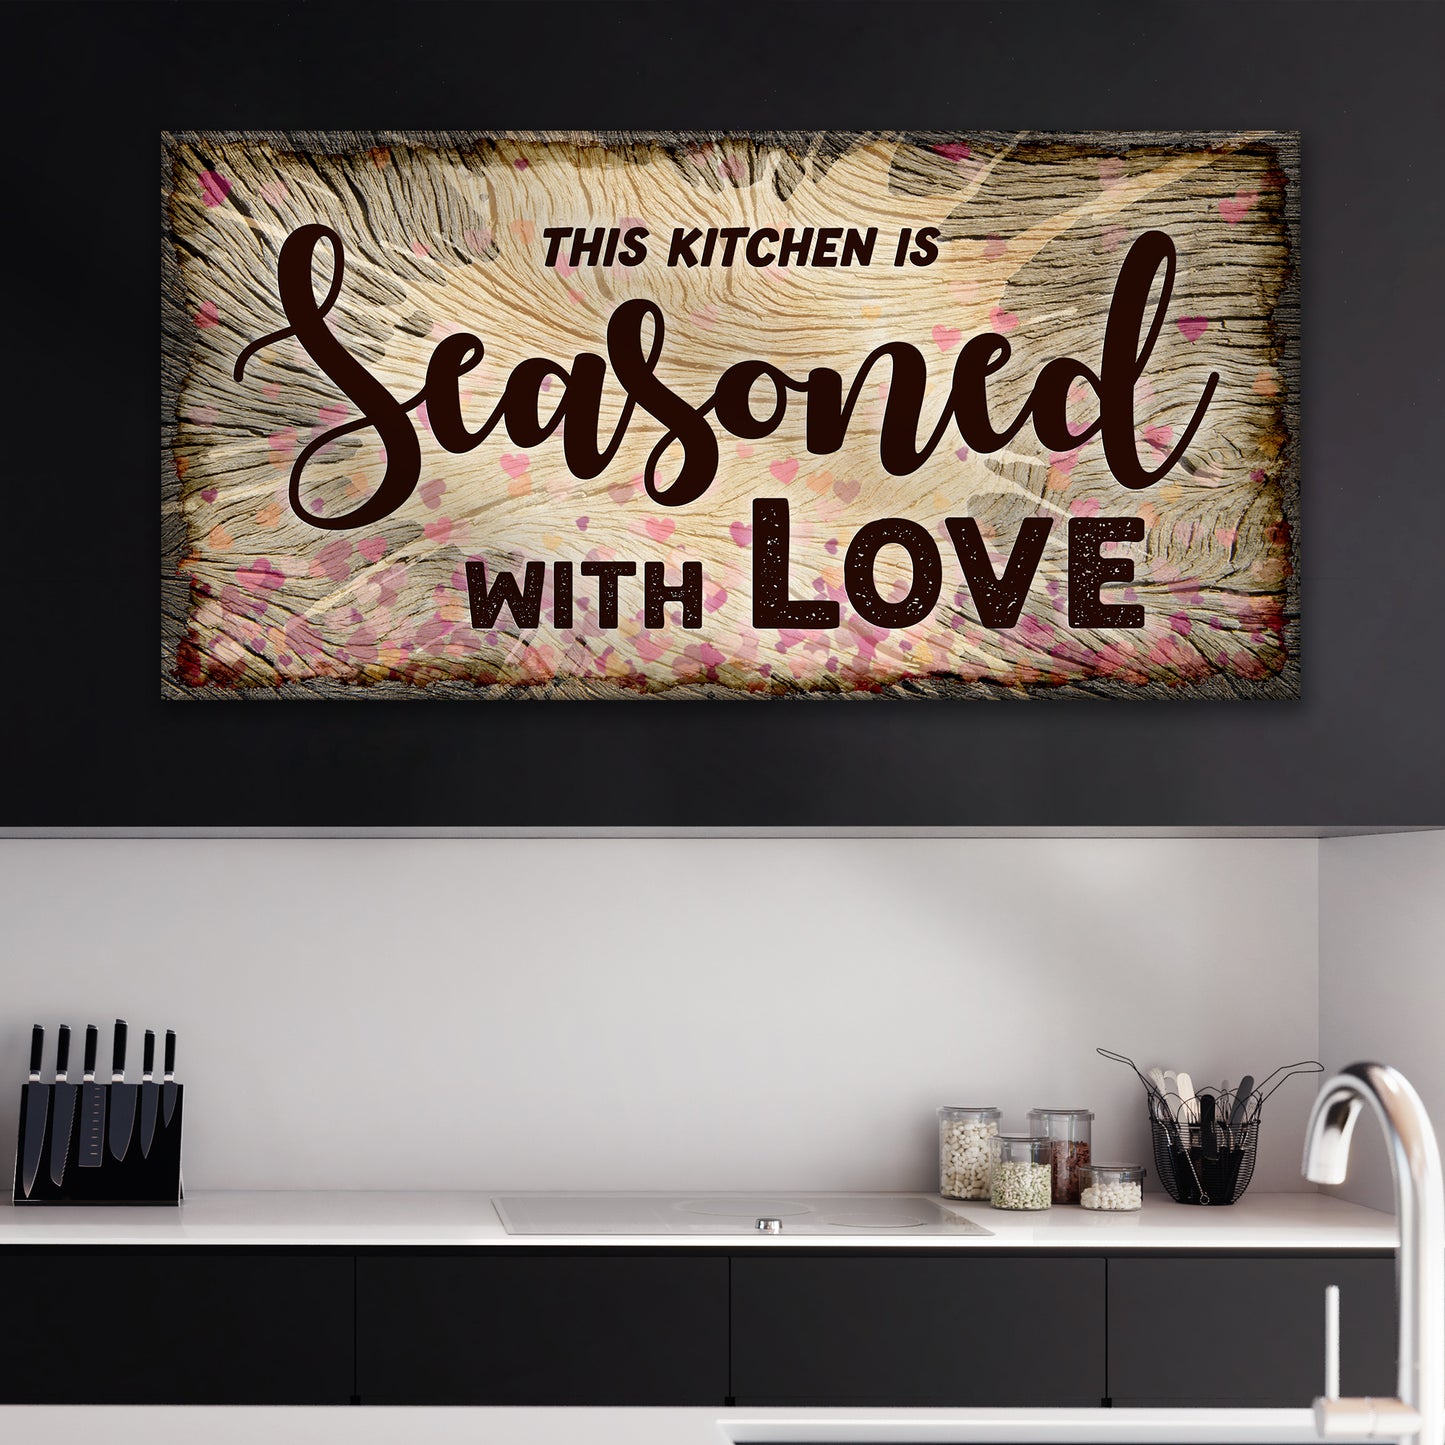 This Kitchen is Seasoned with Love Sign II - Image by Tailored Canvases